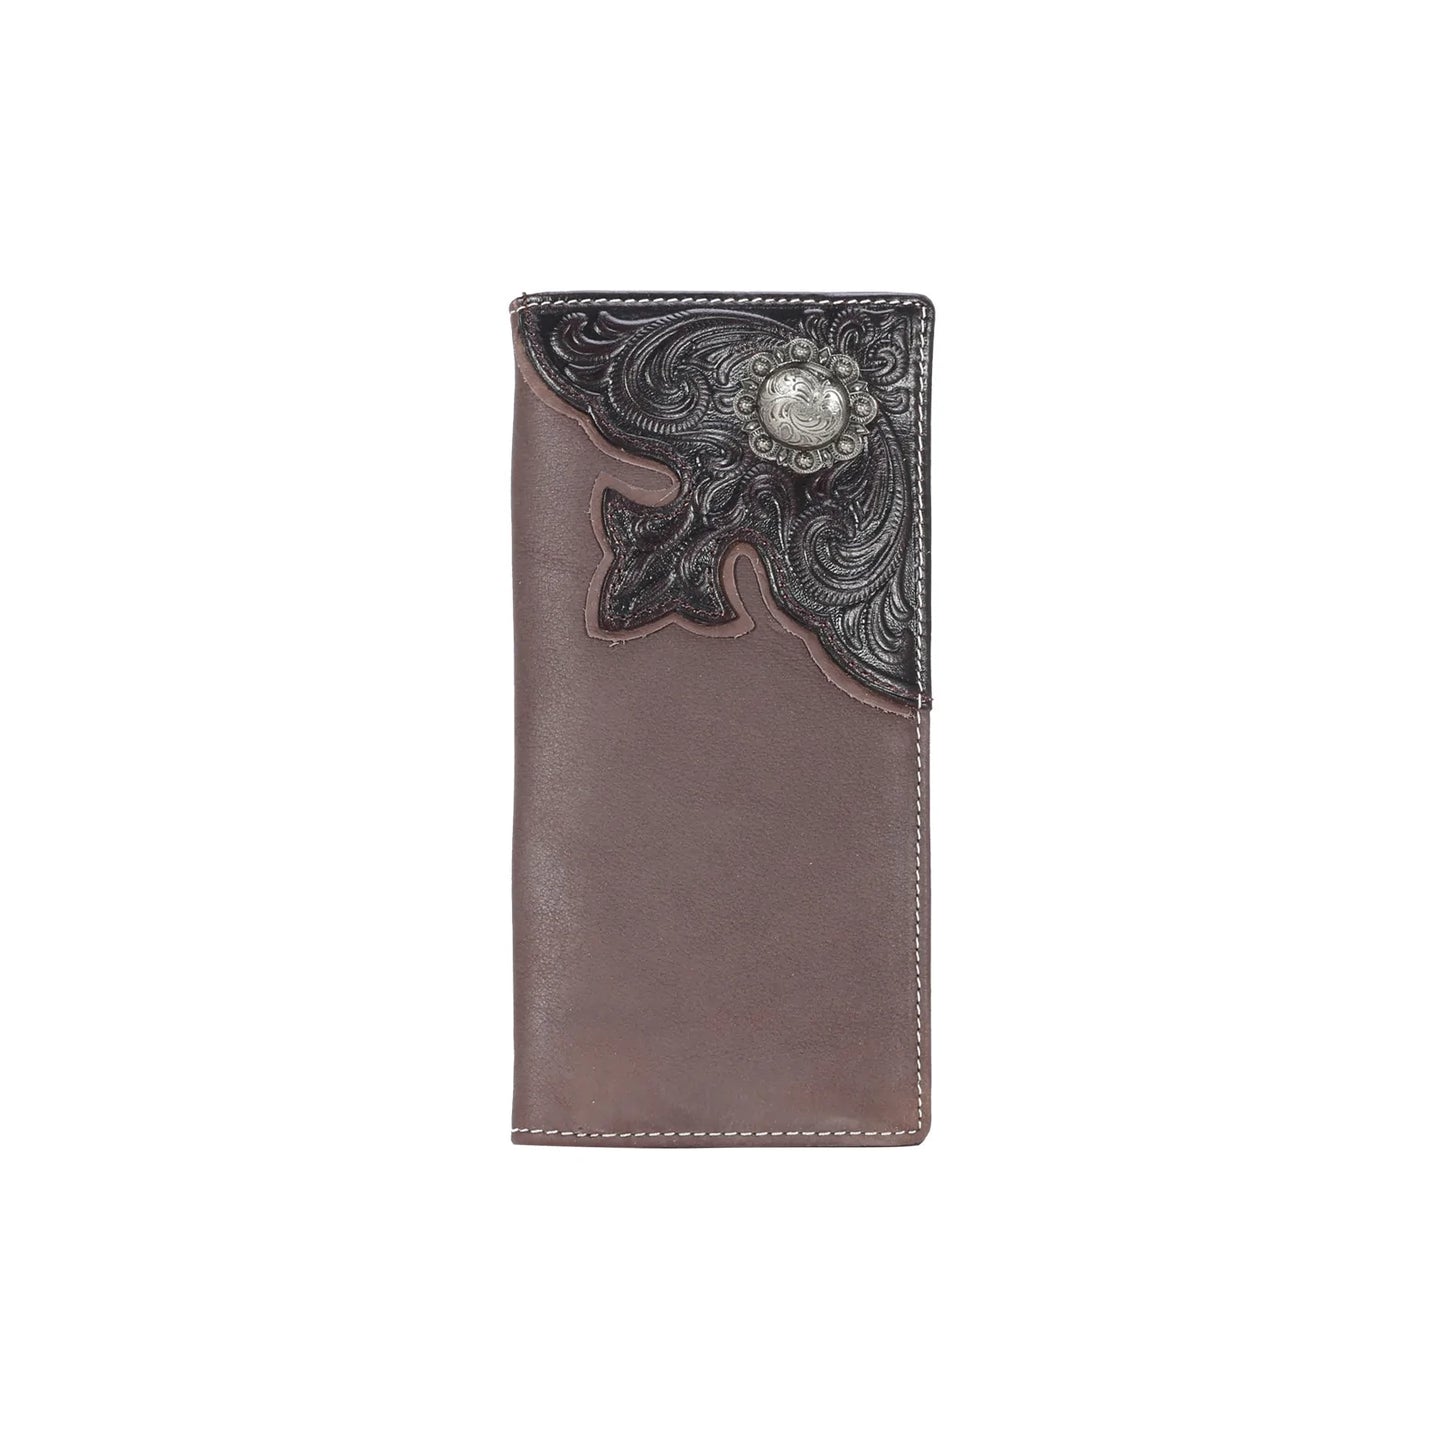 MWLW009 - Genuine Tooled Leather Collection Men's Wallet